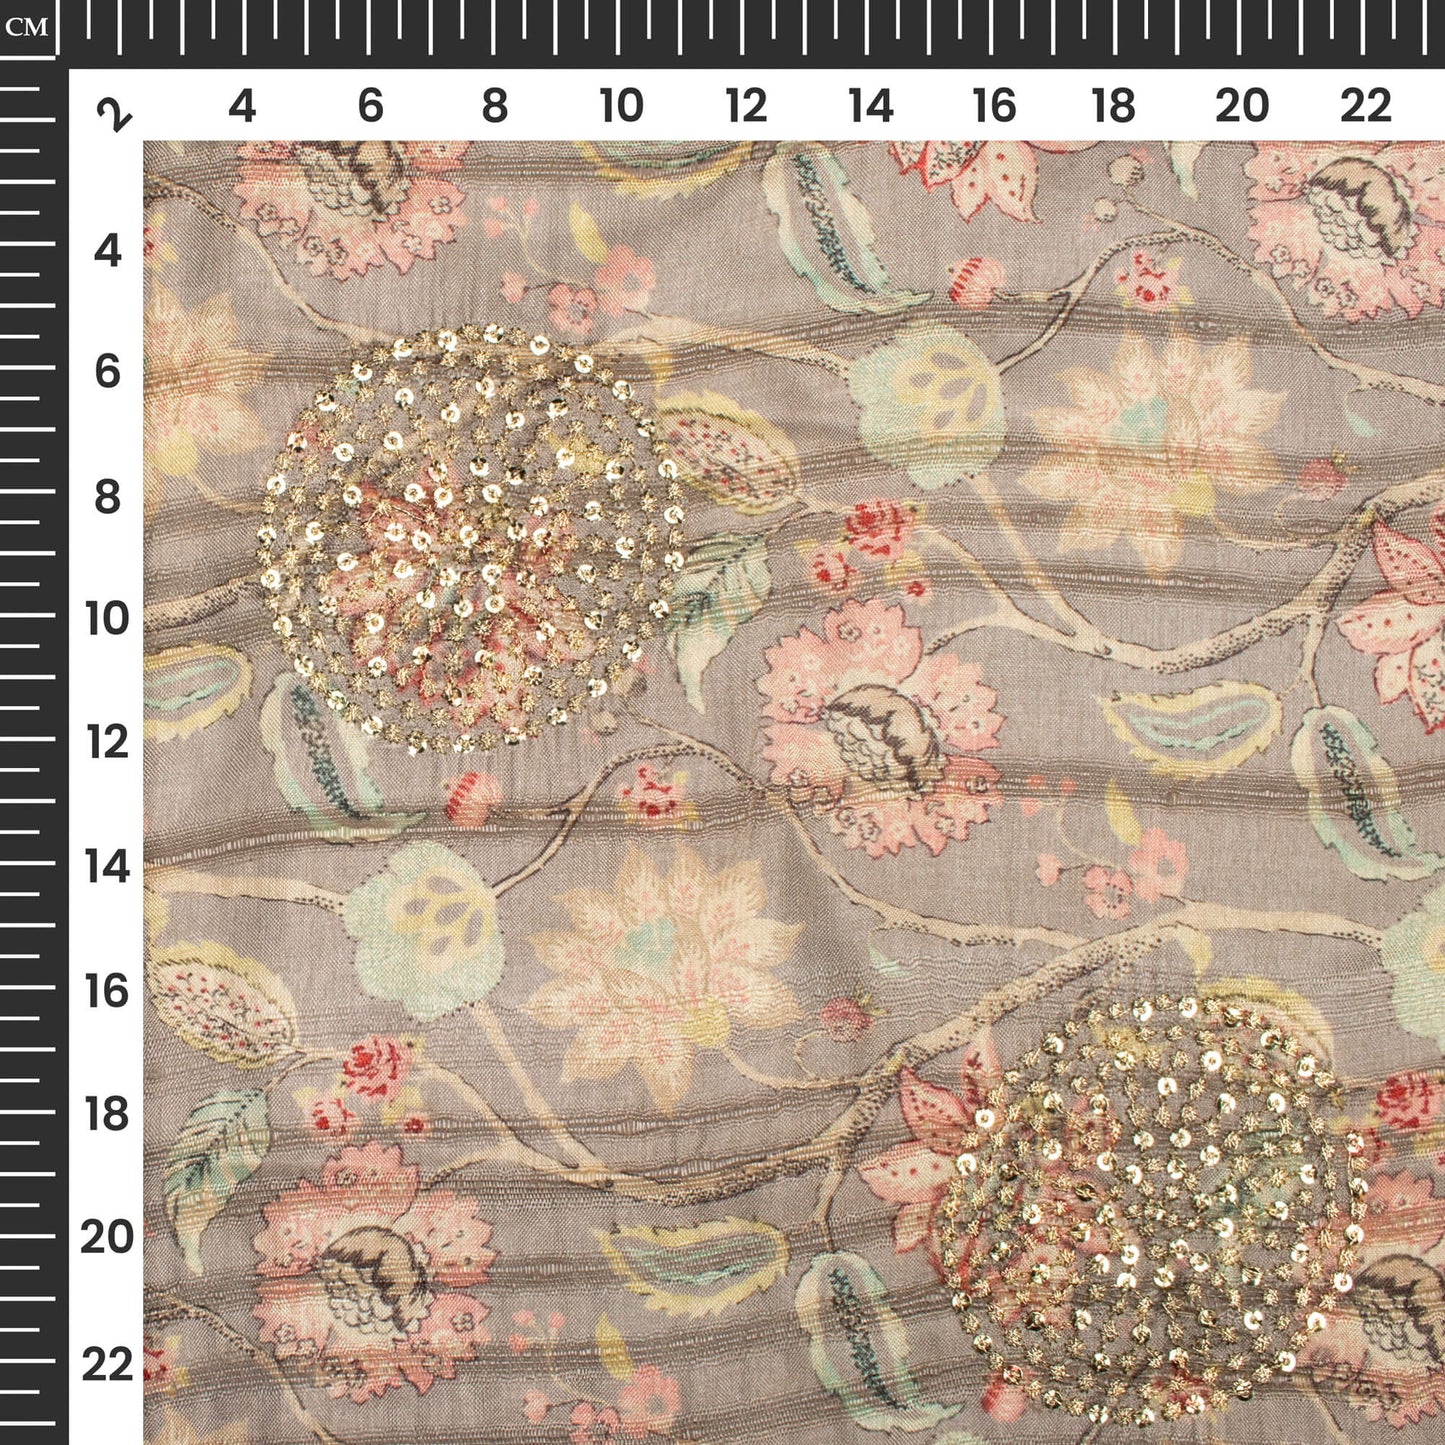 Lovely Pink Floral Digital Print Butta Sequins Embroidery On Heritage Art Silk Fabric